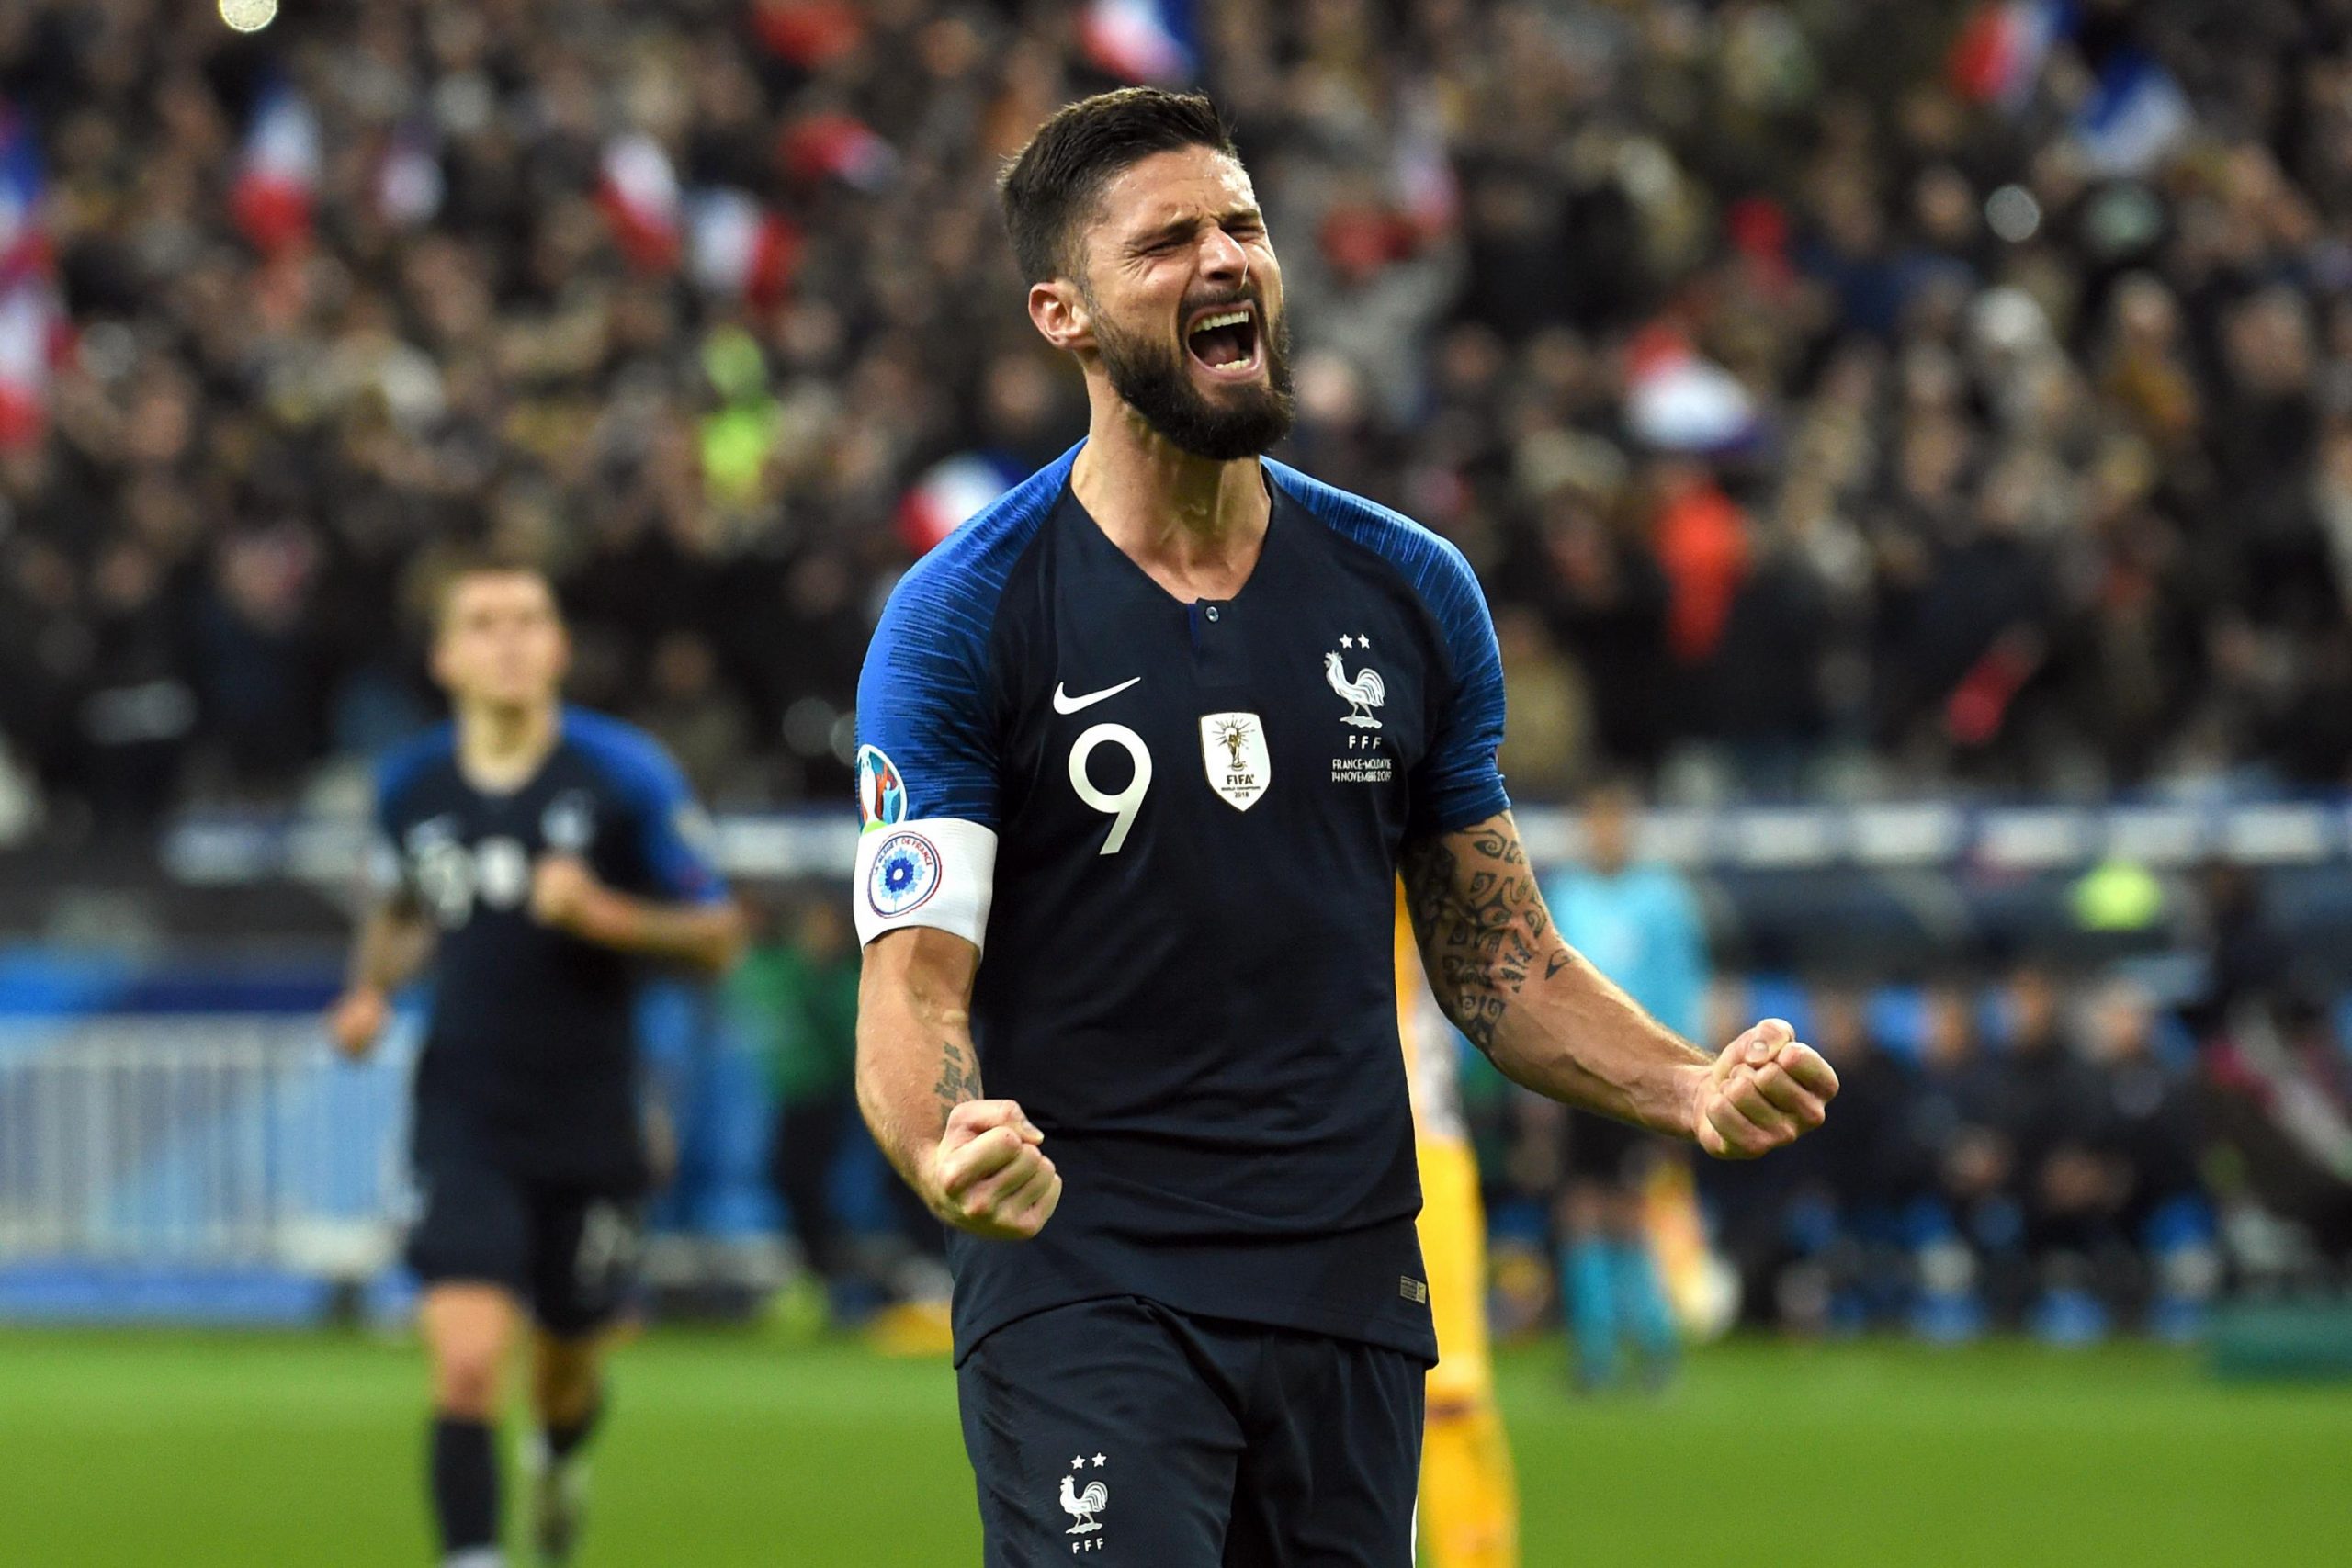 West Ham United are keeping tabs on Chelsea striker Olivier Giroud heading into the January transfer window.